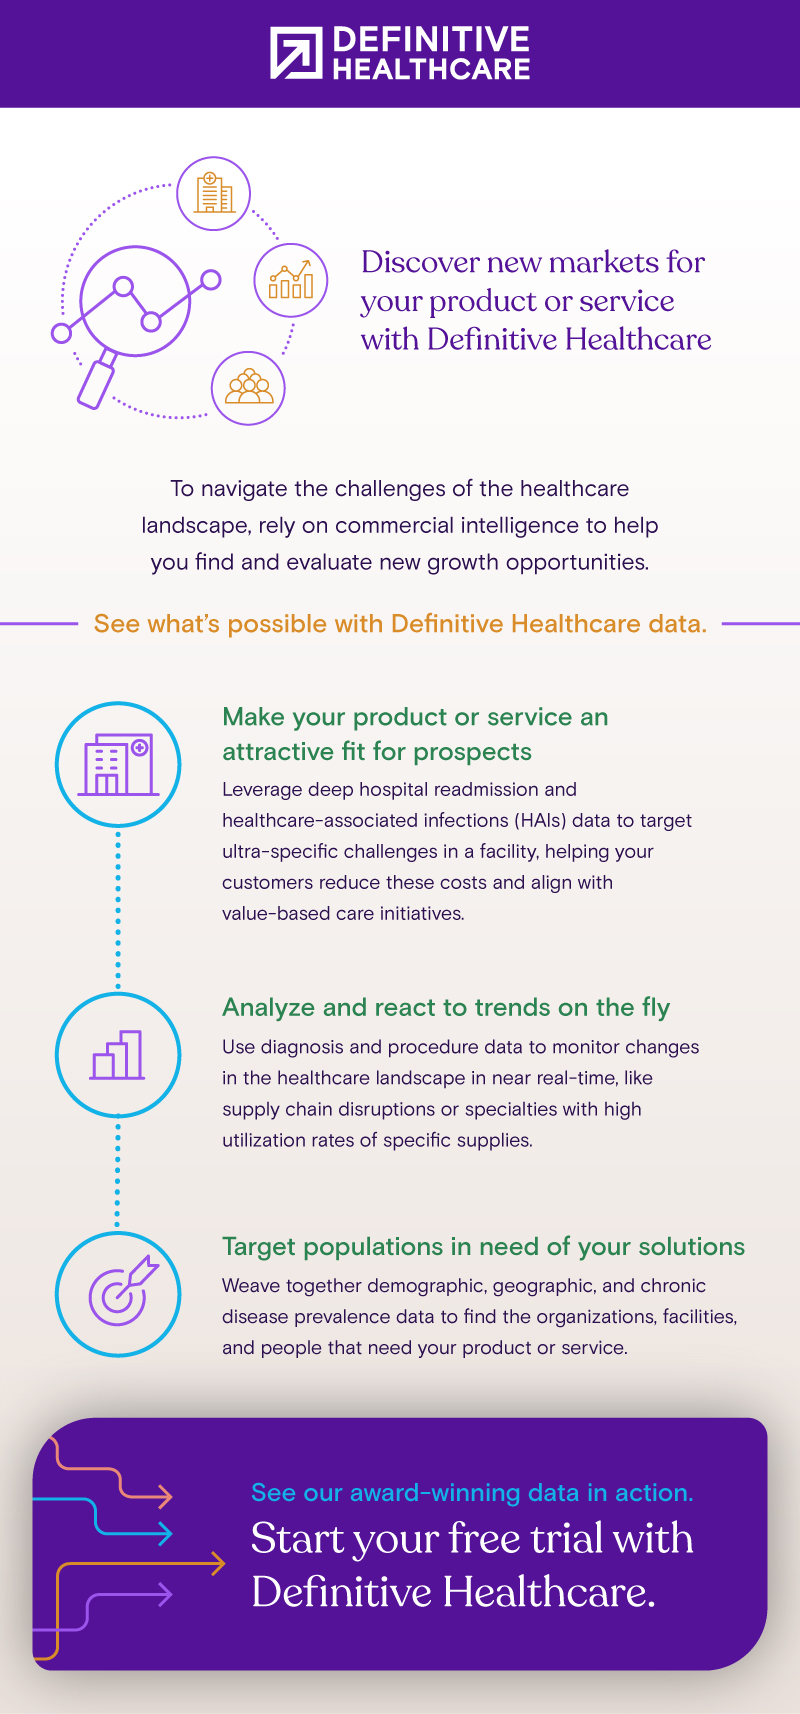 Discover new markets for your product or service with Definitive Healthcare